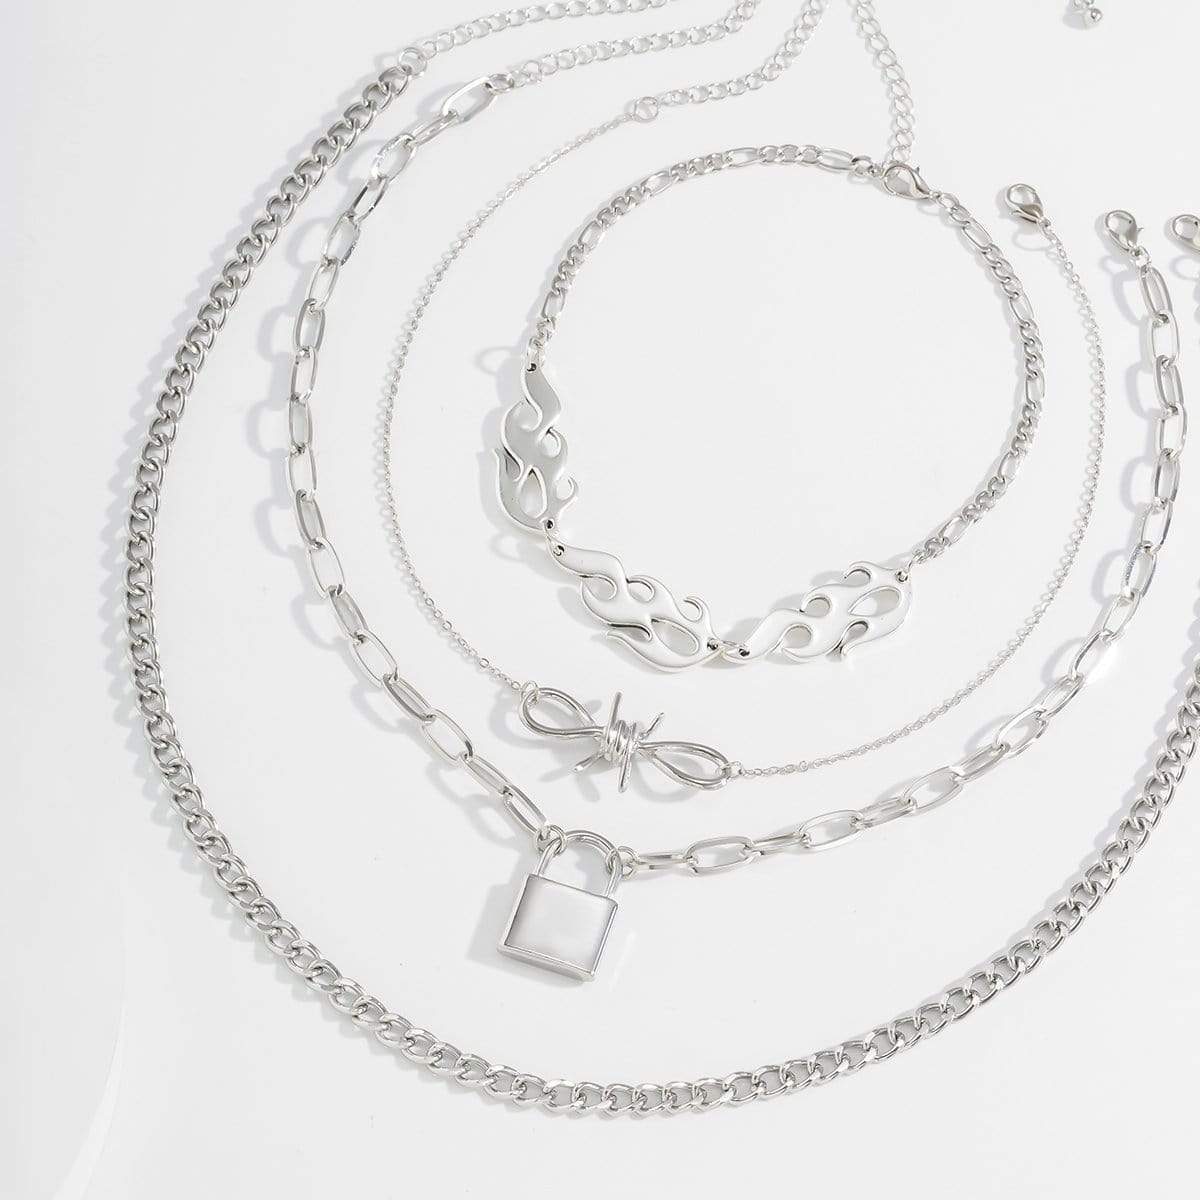 Silver Lock Charm Chain / Choker / Necklace: 